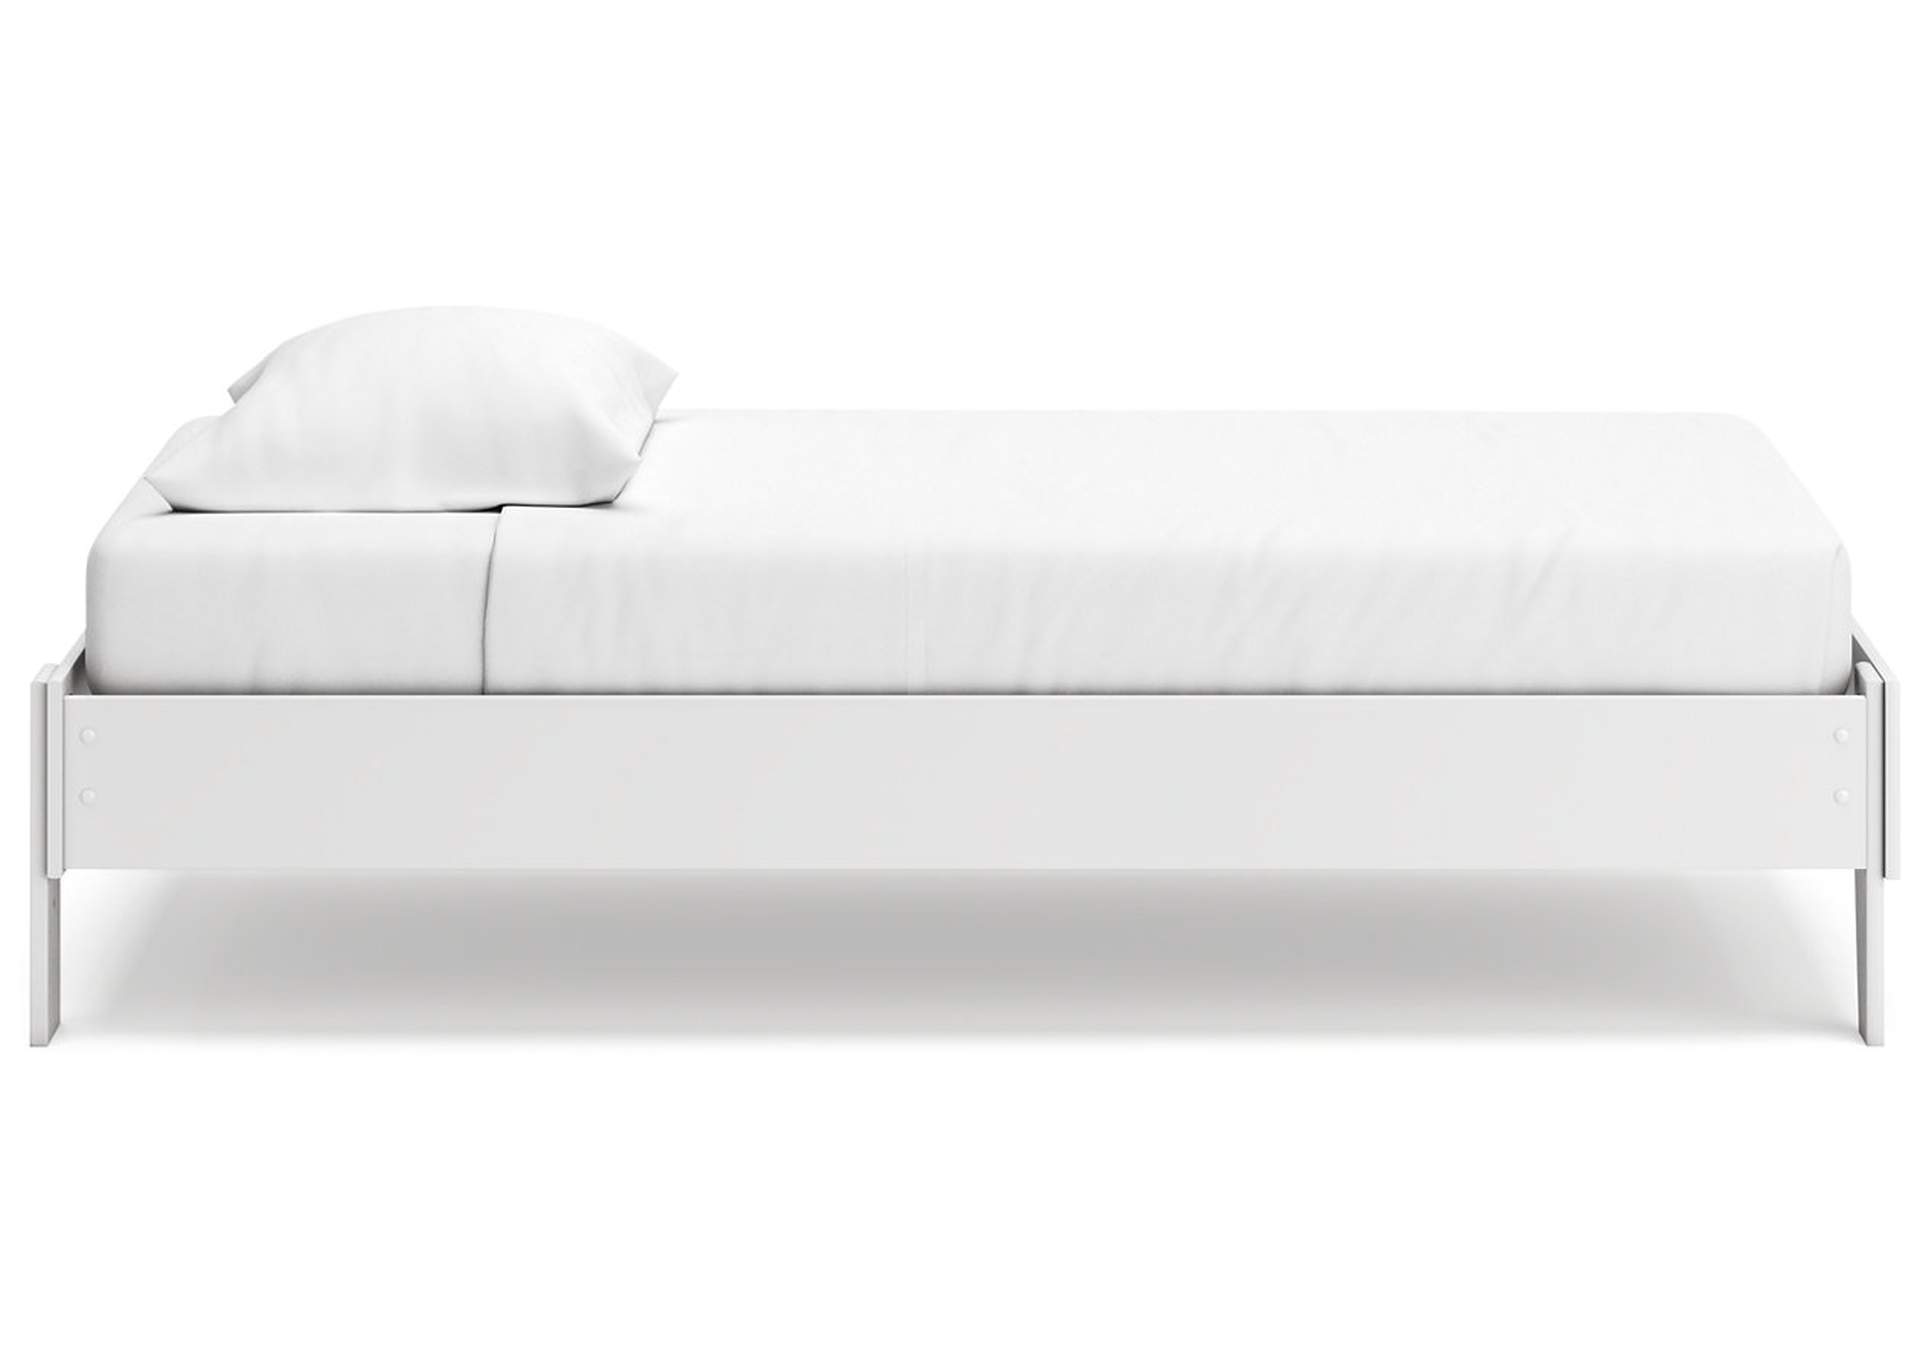 Socalle Twin Platform Bed,Signature Design By Ashley